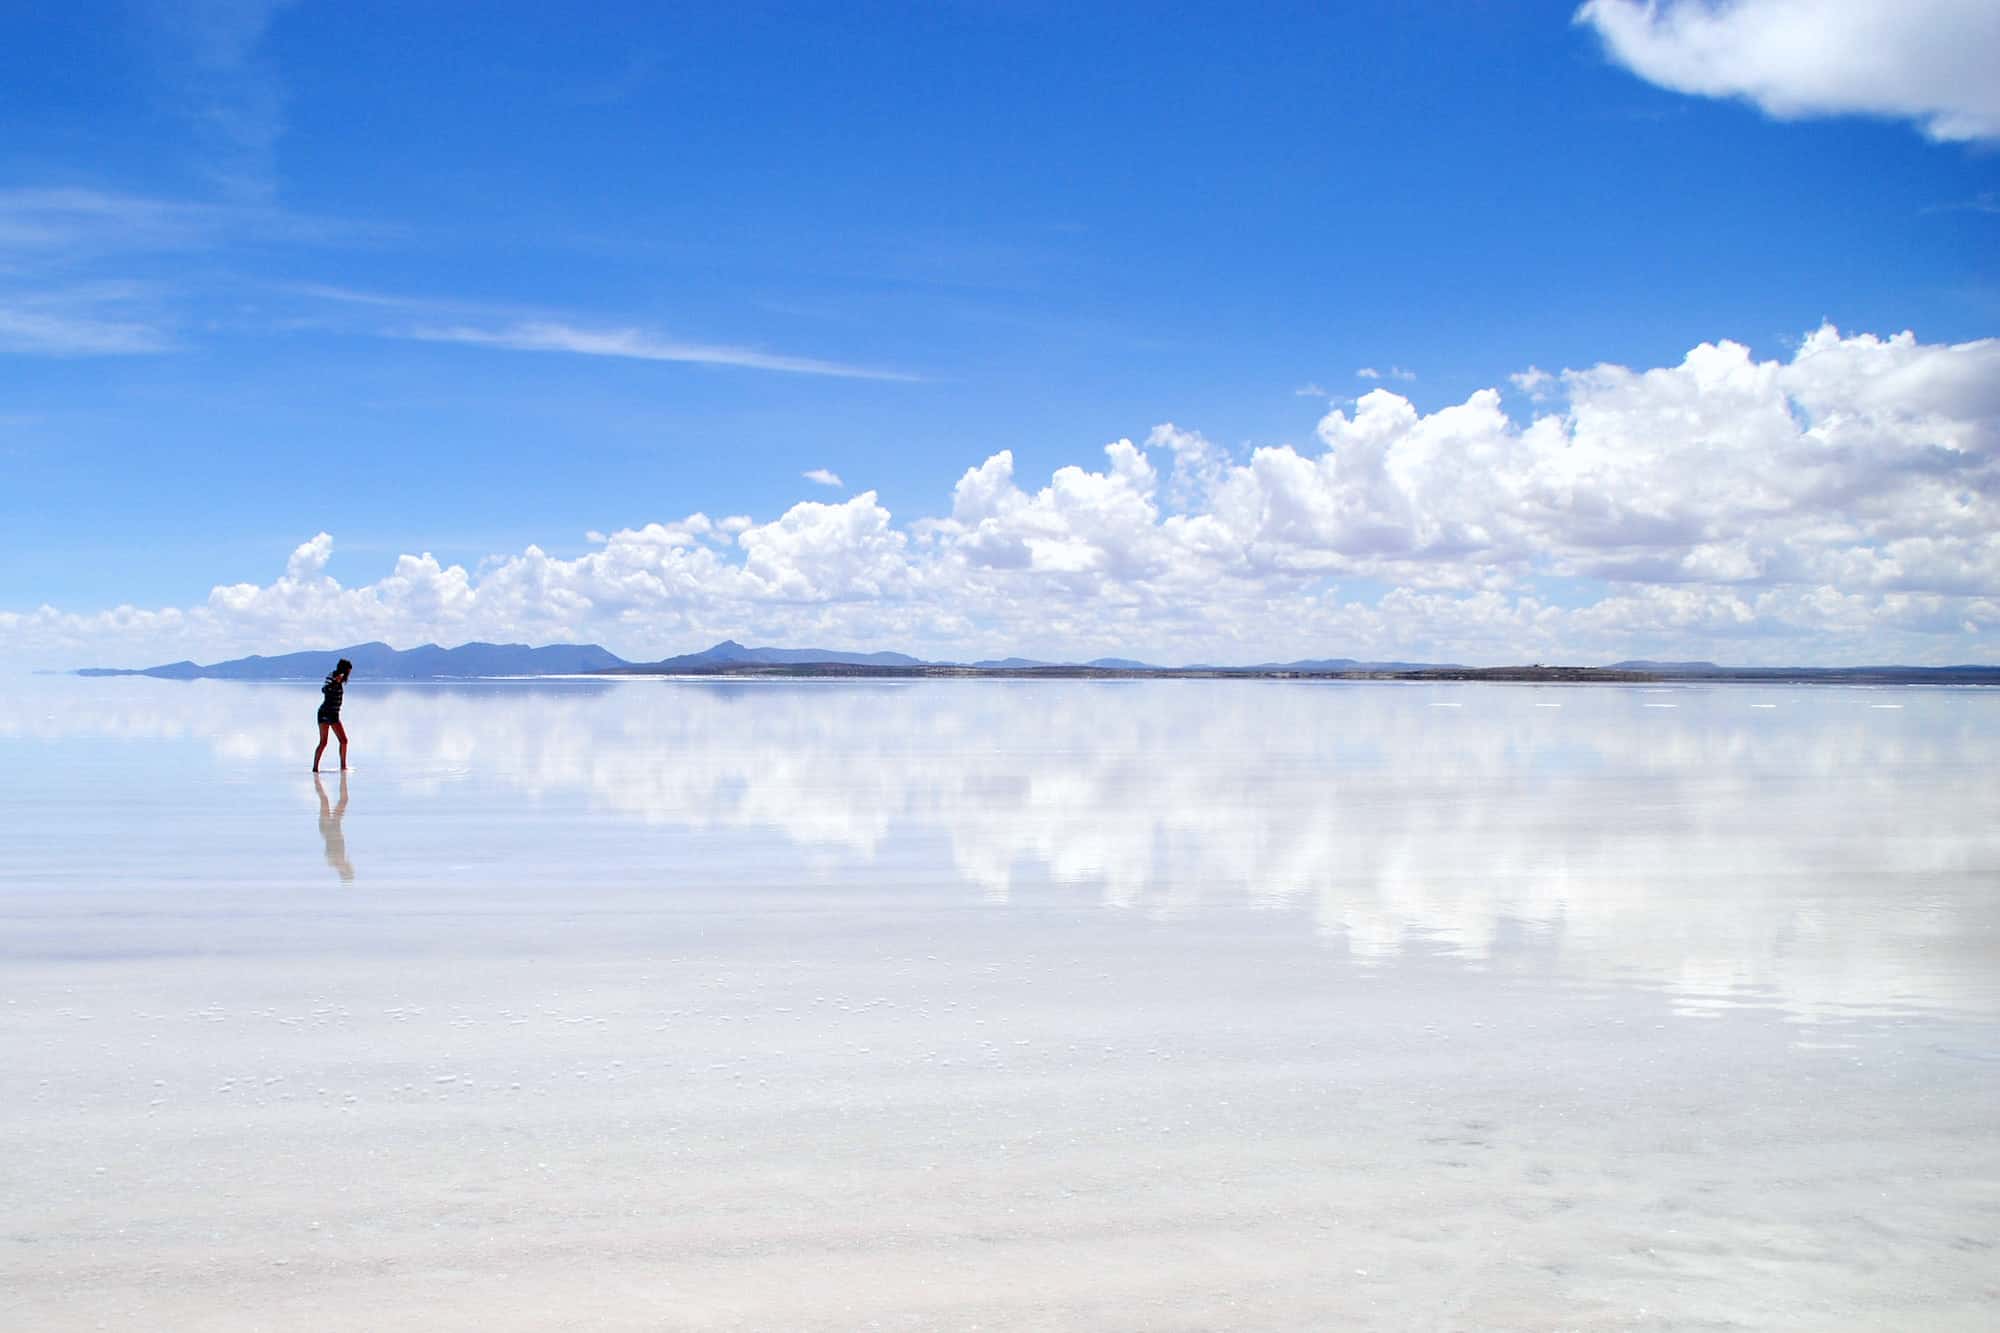 Uyuni Salt Flats is a magical experience in Bolivia, not to be missed.